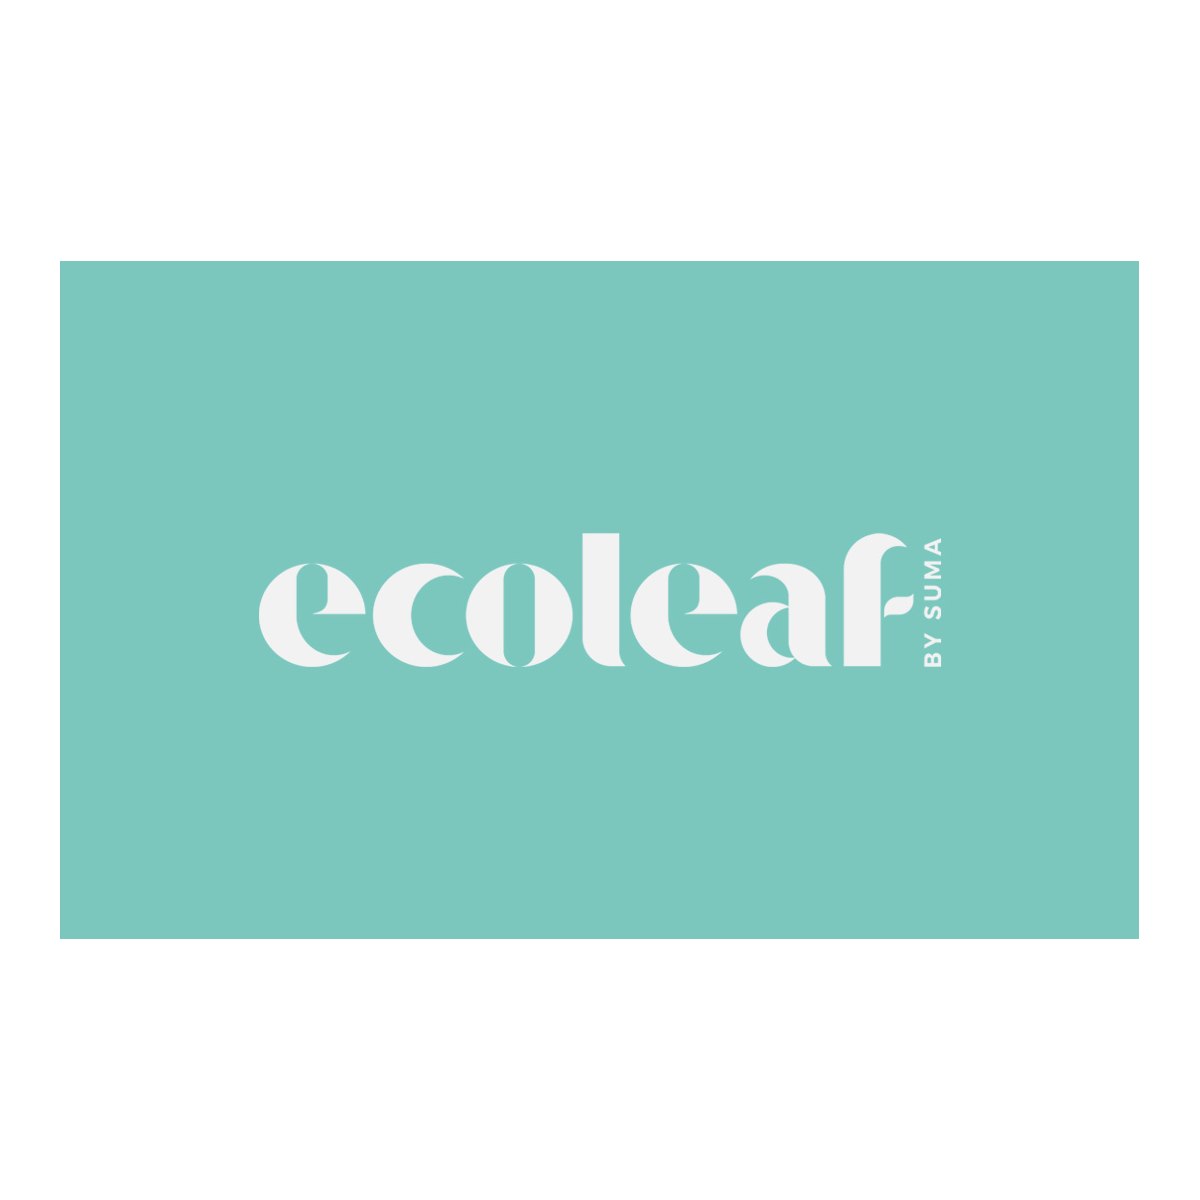 Where to buy Ecoleaf Products